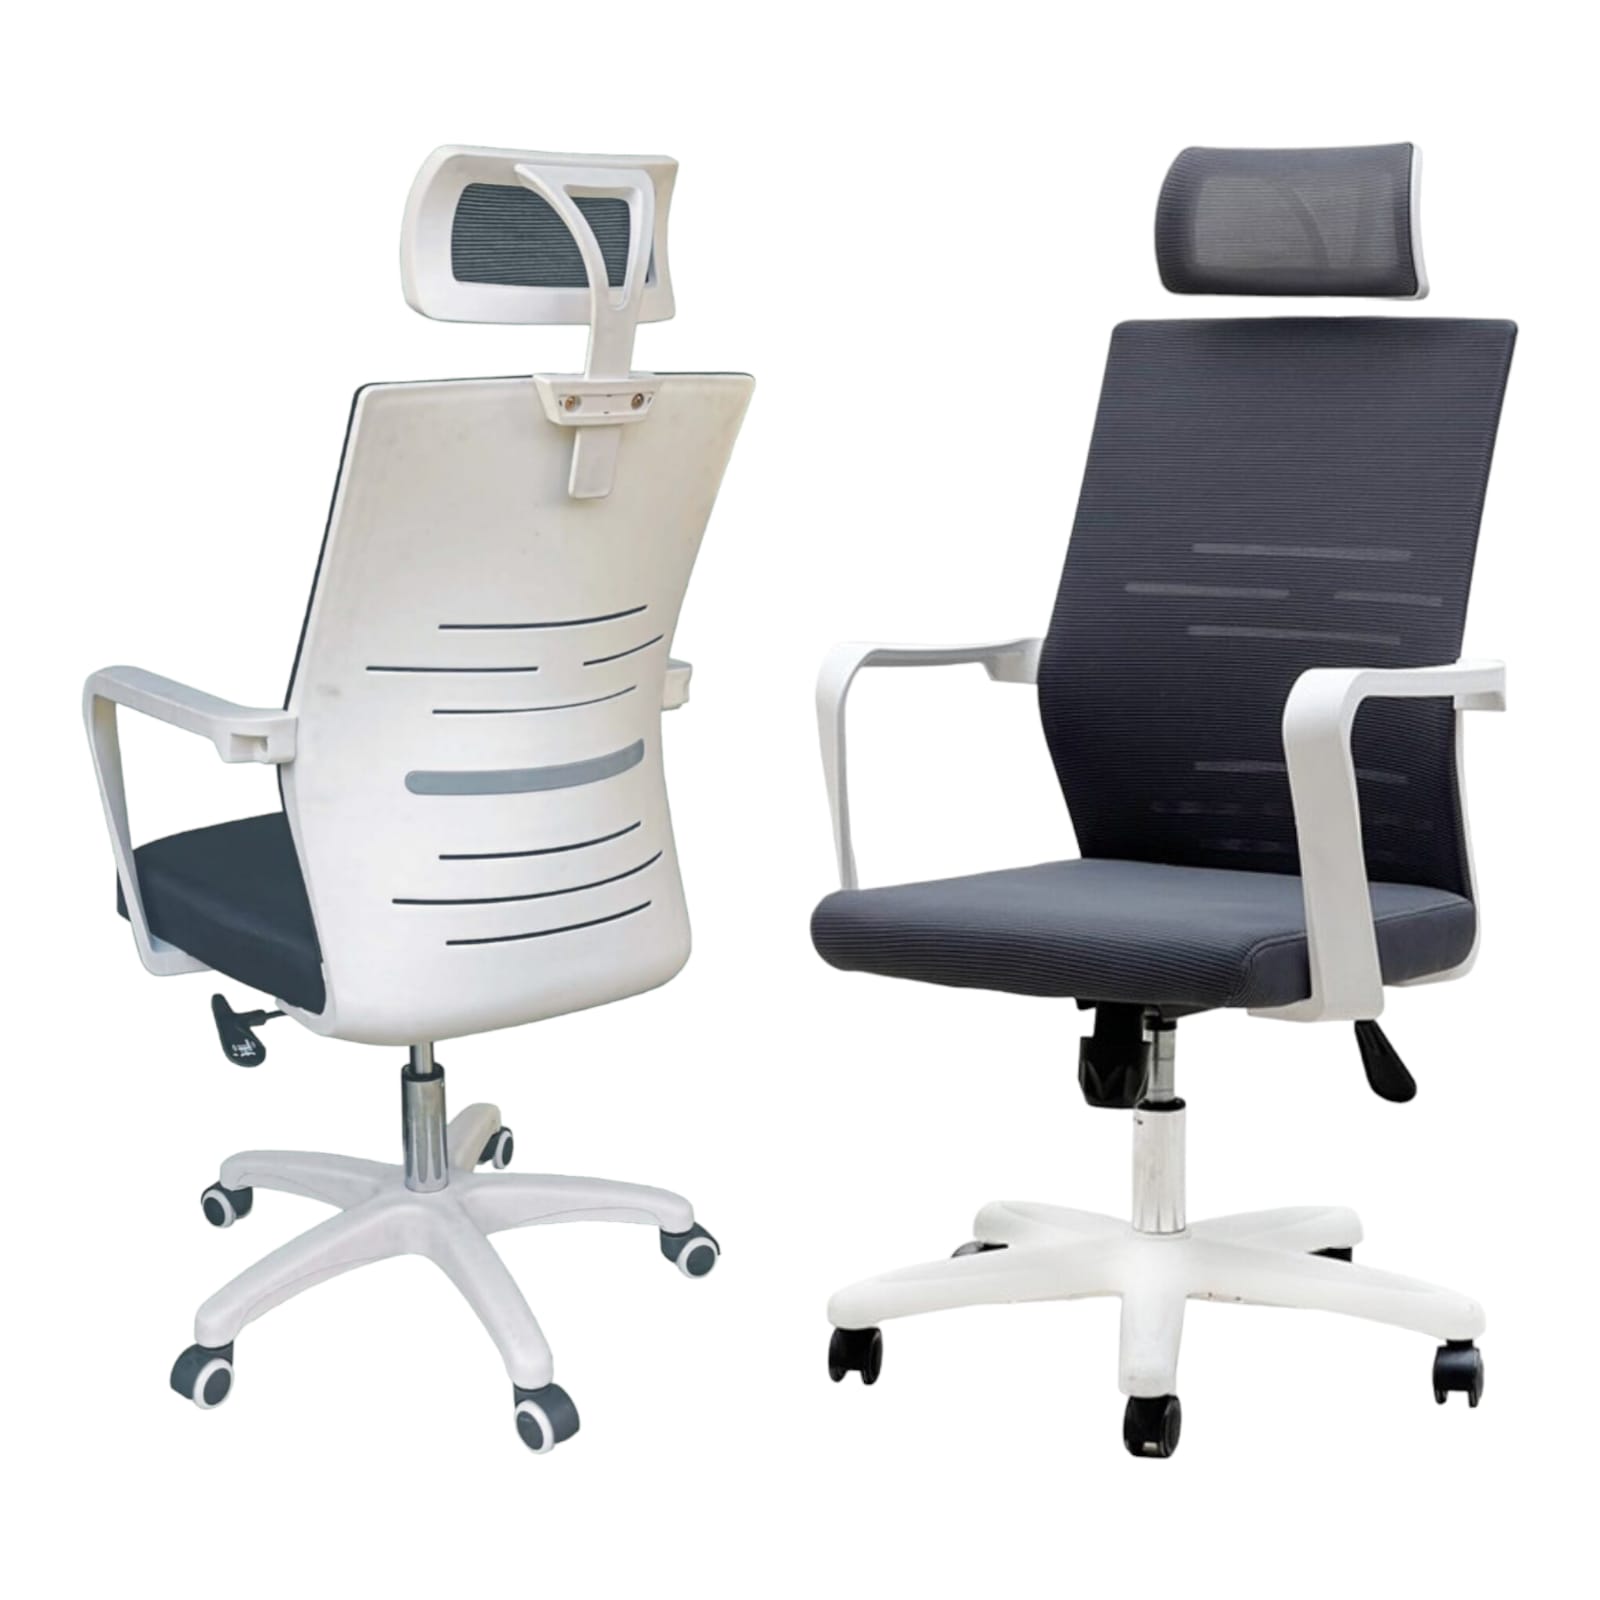 60 - High Back Office Chair - White